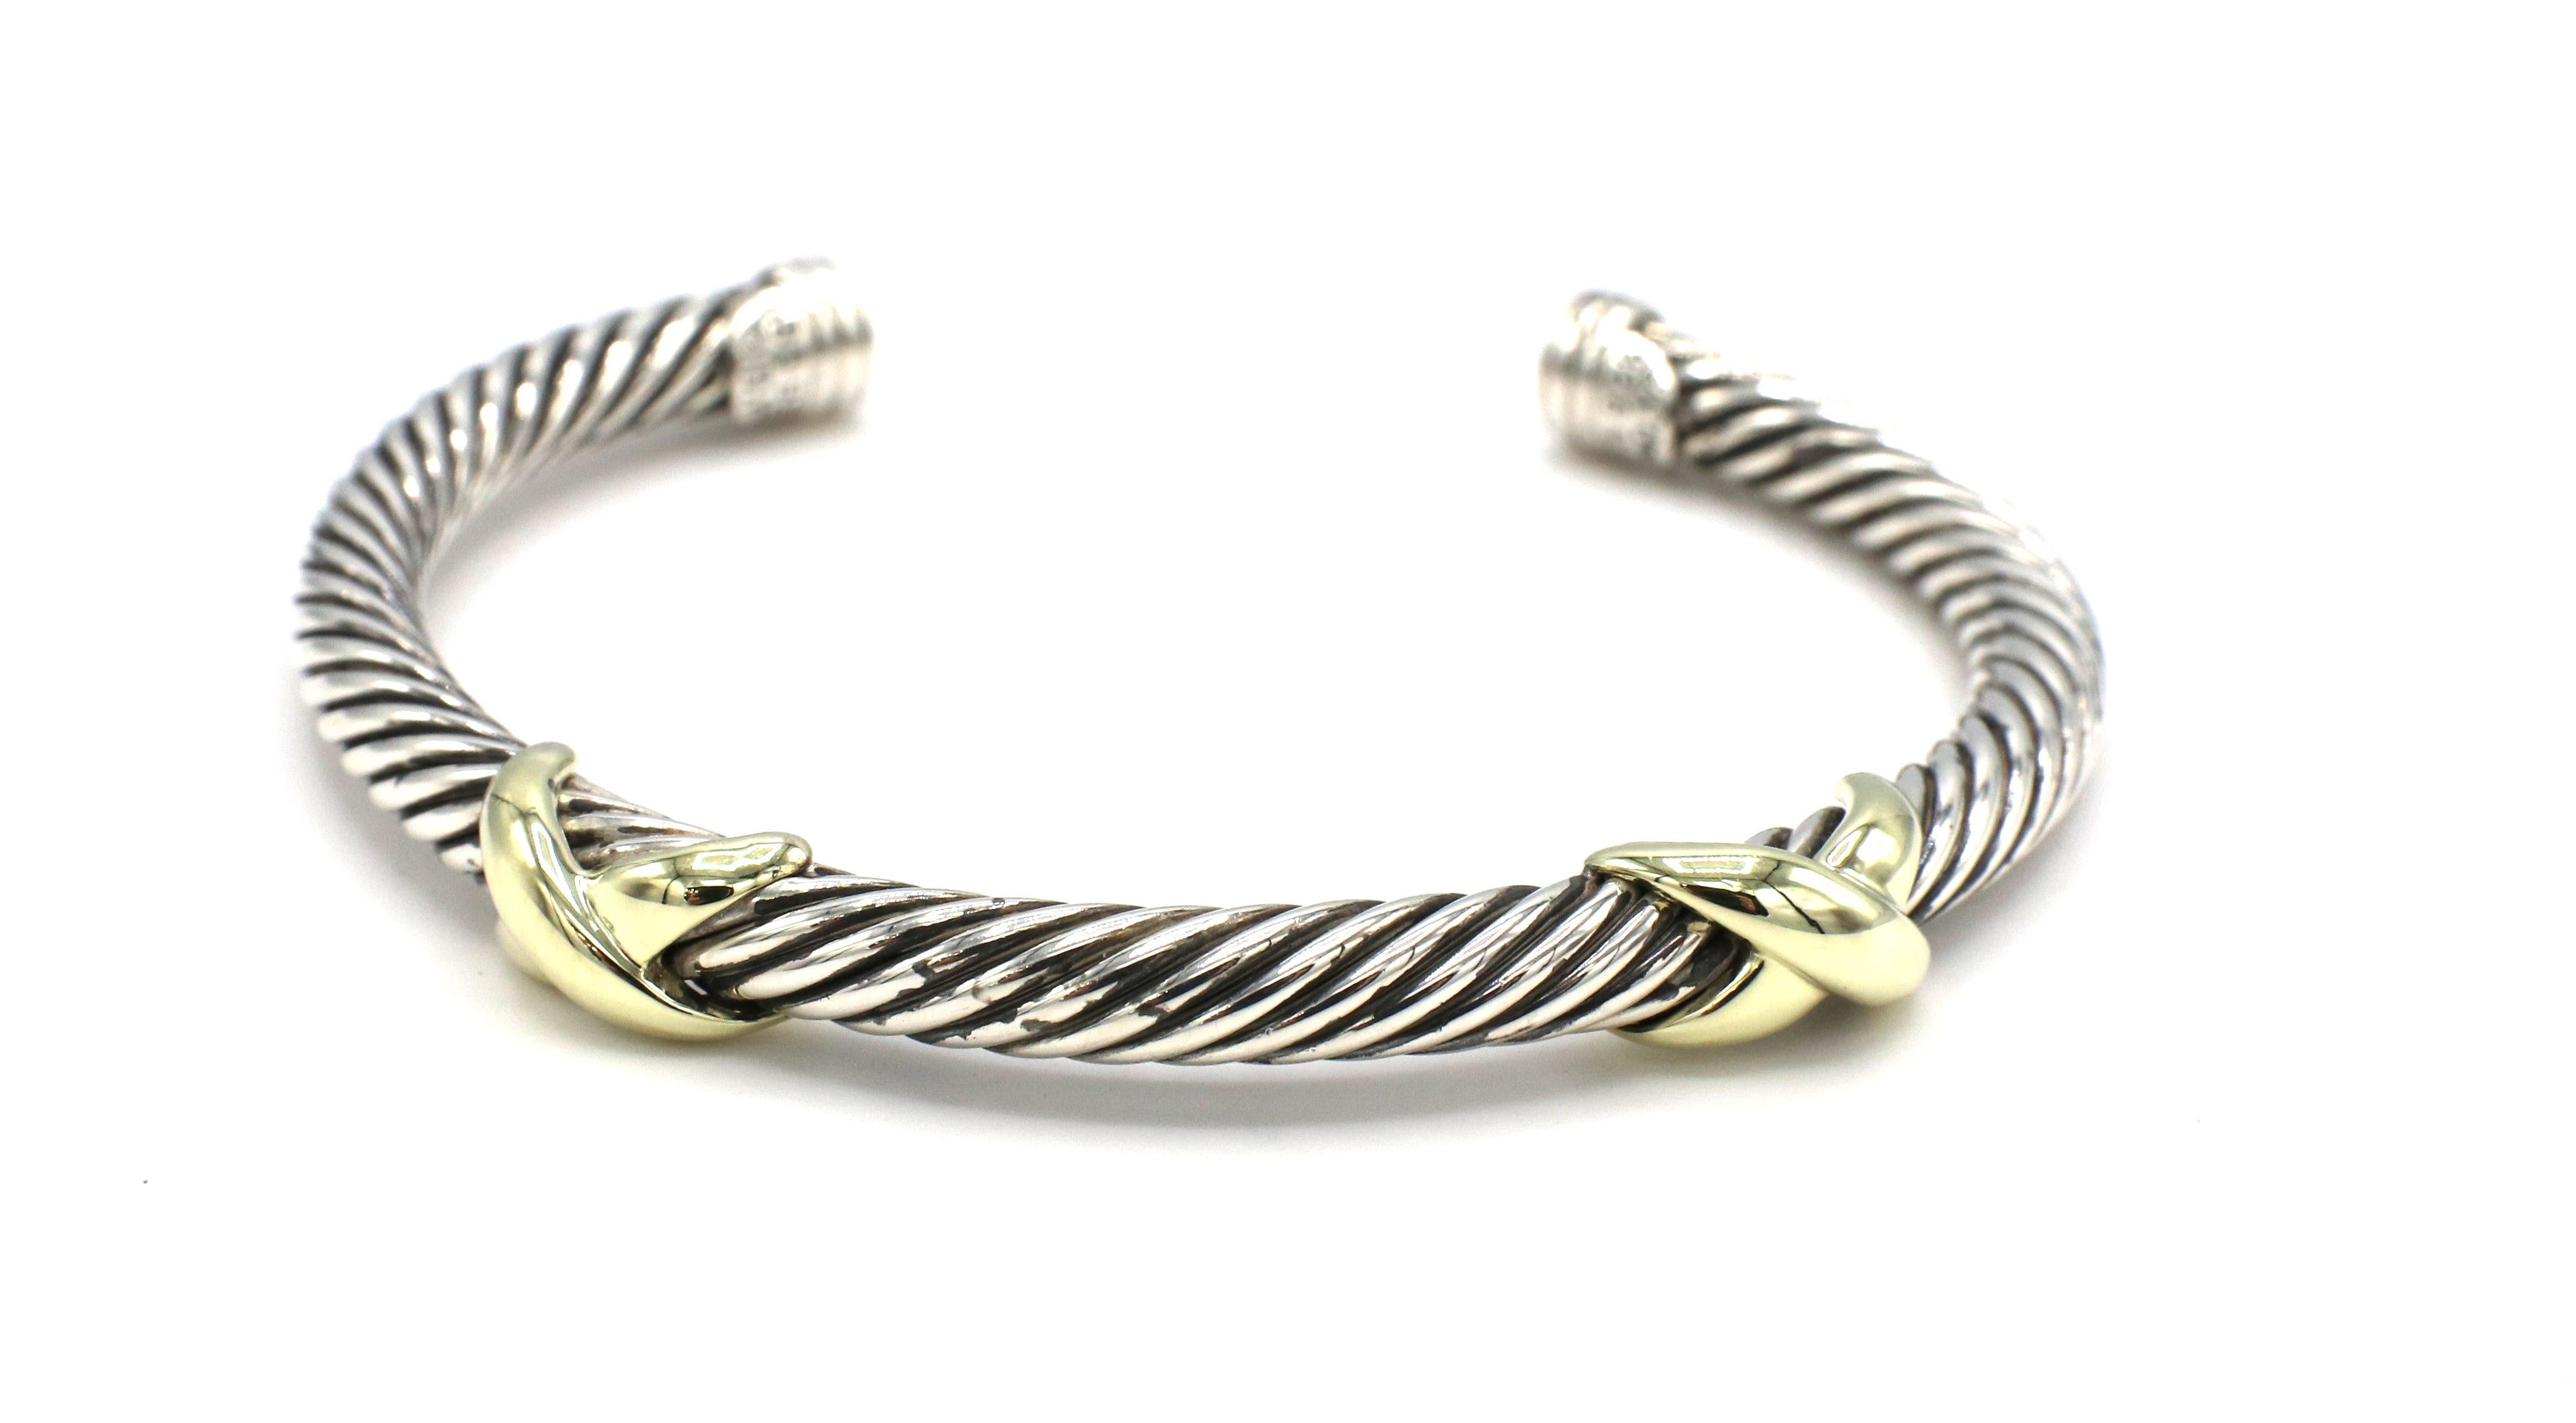 David Yurman Sterling Silver Cable Double X Bangle Bracelet 
Metal: Sterling silver & 14k yellow gold
Weight: 28.2 grams
Width: 4.8mm
Signed: D.Y. 585 925
Inside diameter: 55mm
Outside diameter: 65mm
Fits a wrist size approx. 6.75